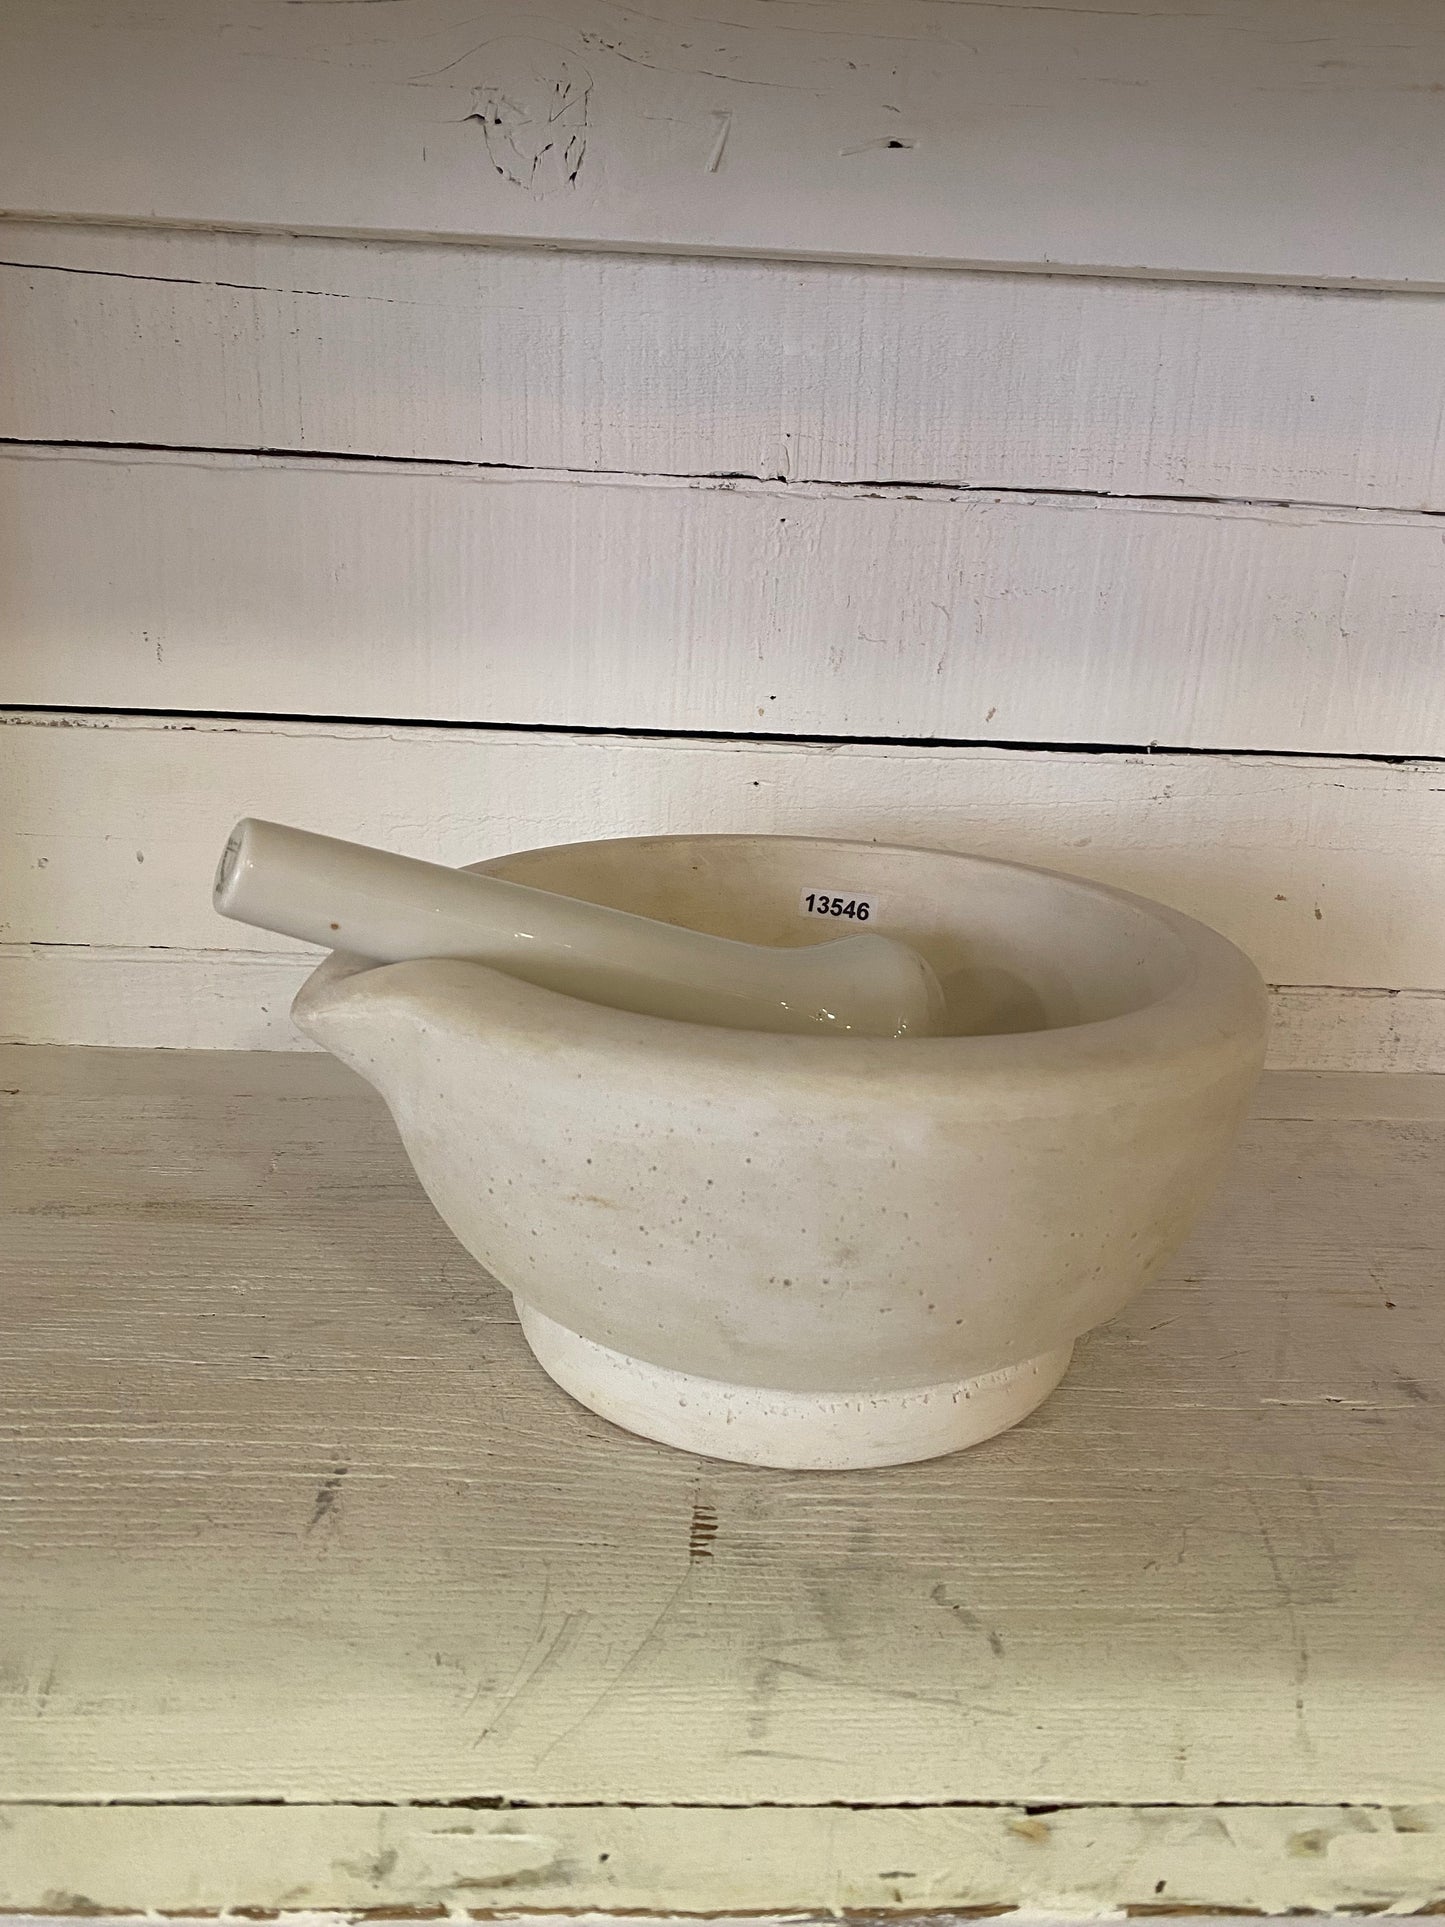 Stone Mortar with Pestle from Berlin (Large)